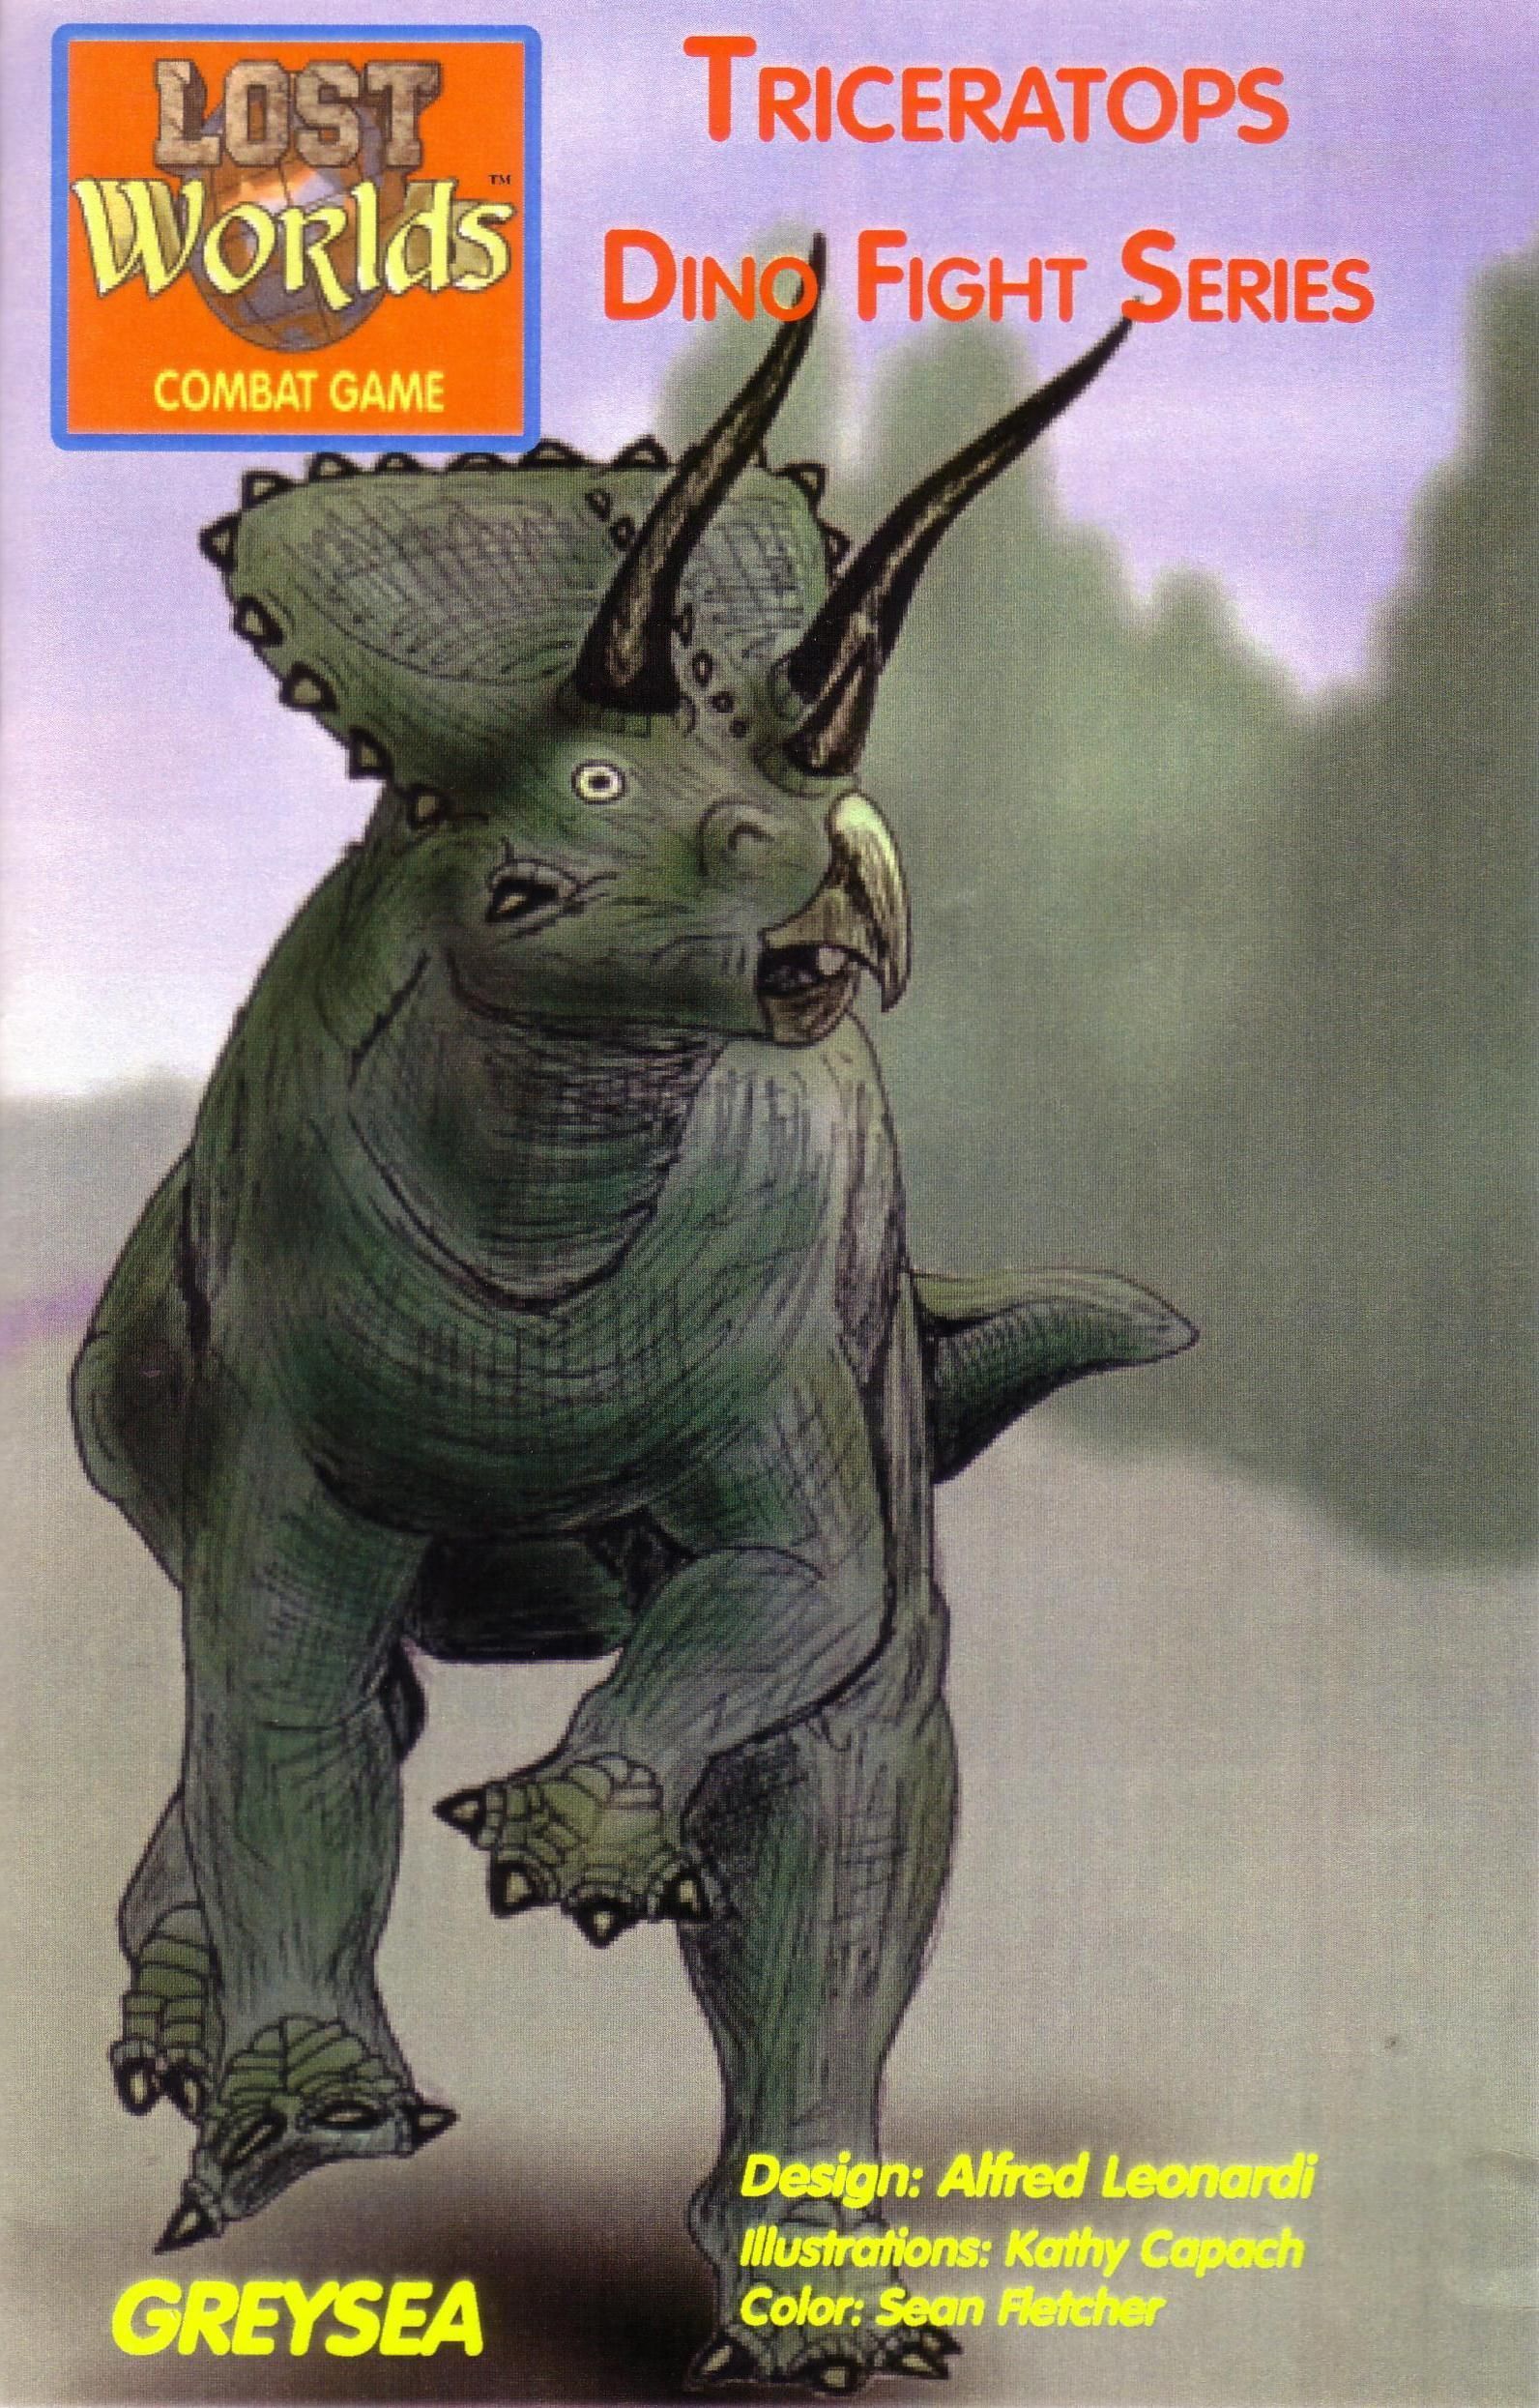 Lost Worlds: Dino Fight Series – Triceratops